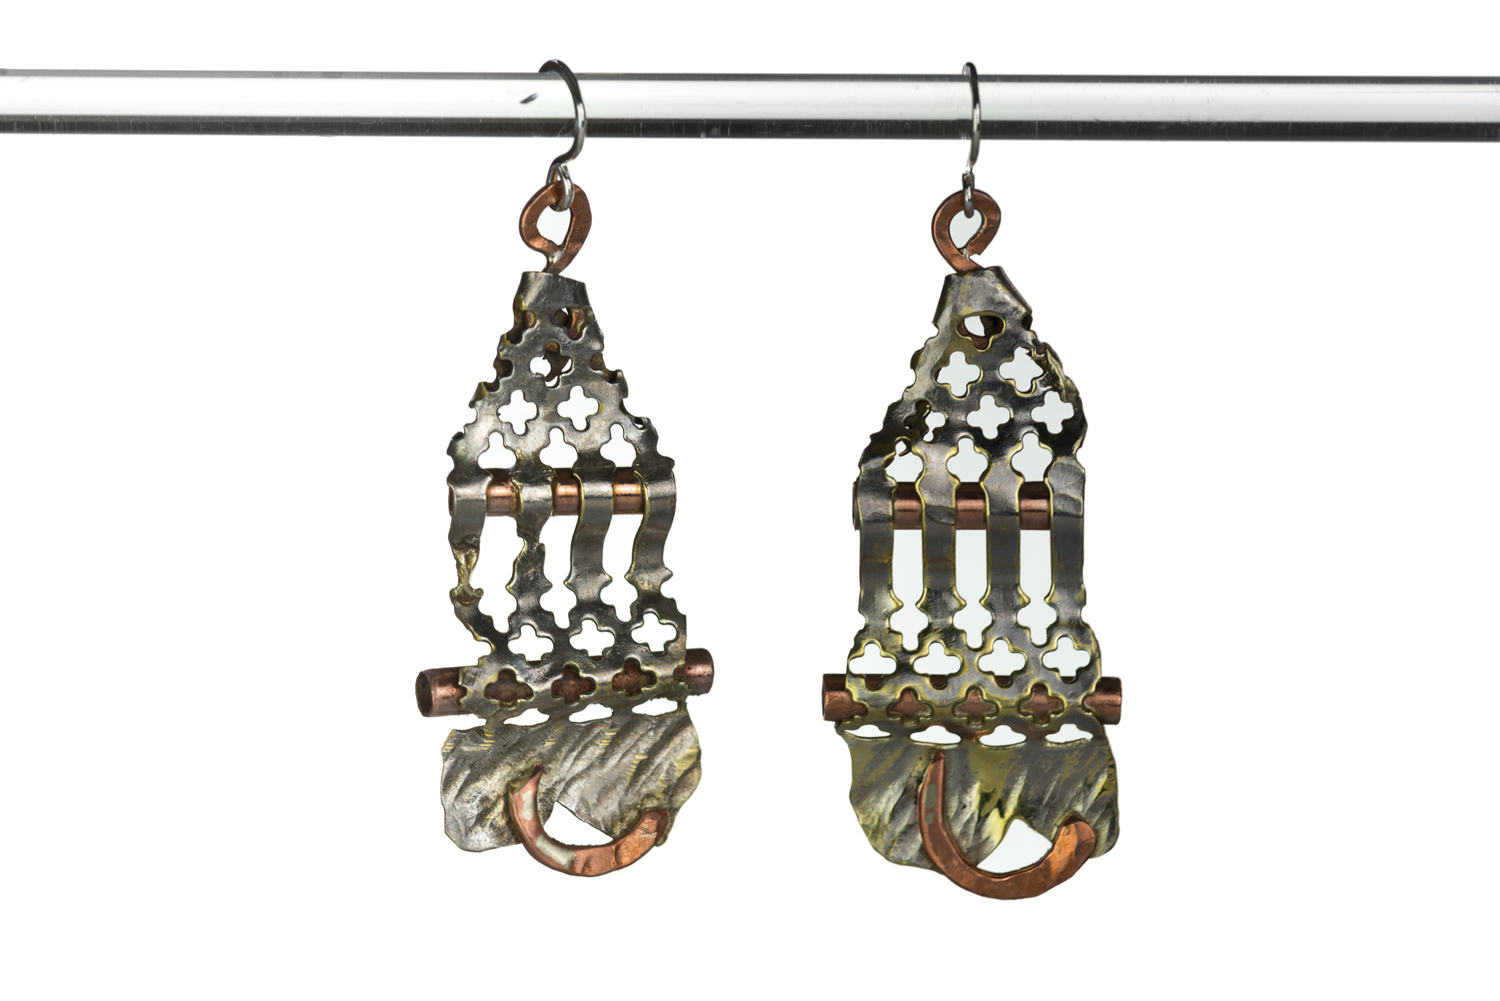 COPPER PIPE EARRINGS ~ Repurposed hand-forged vintage silver and copper